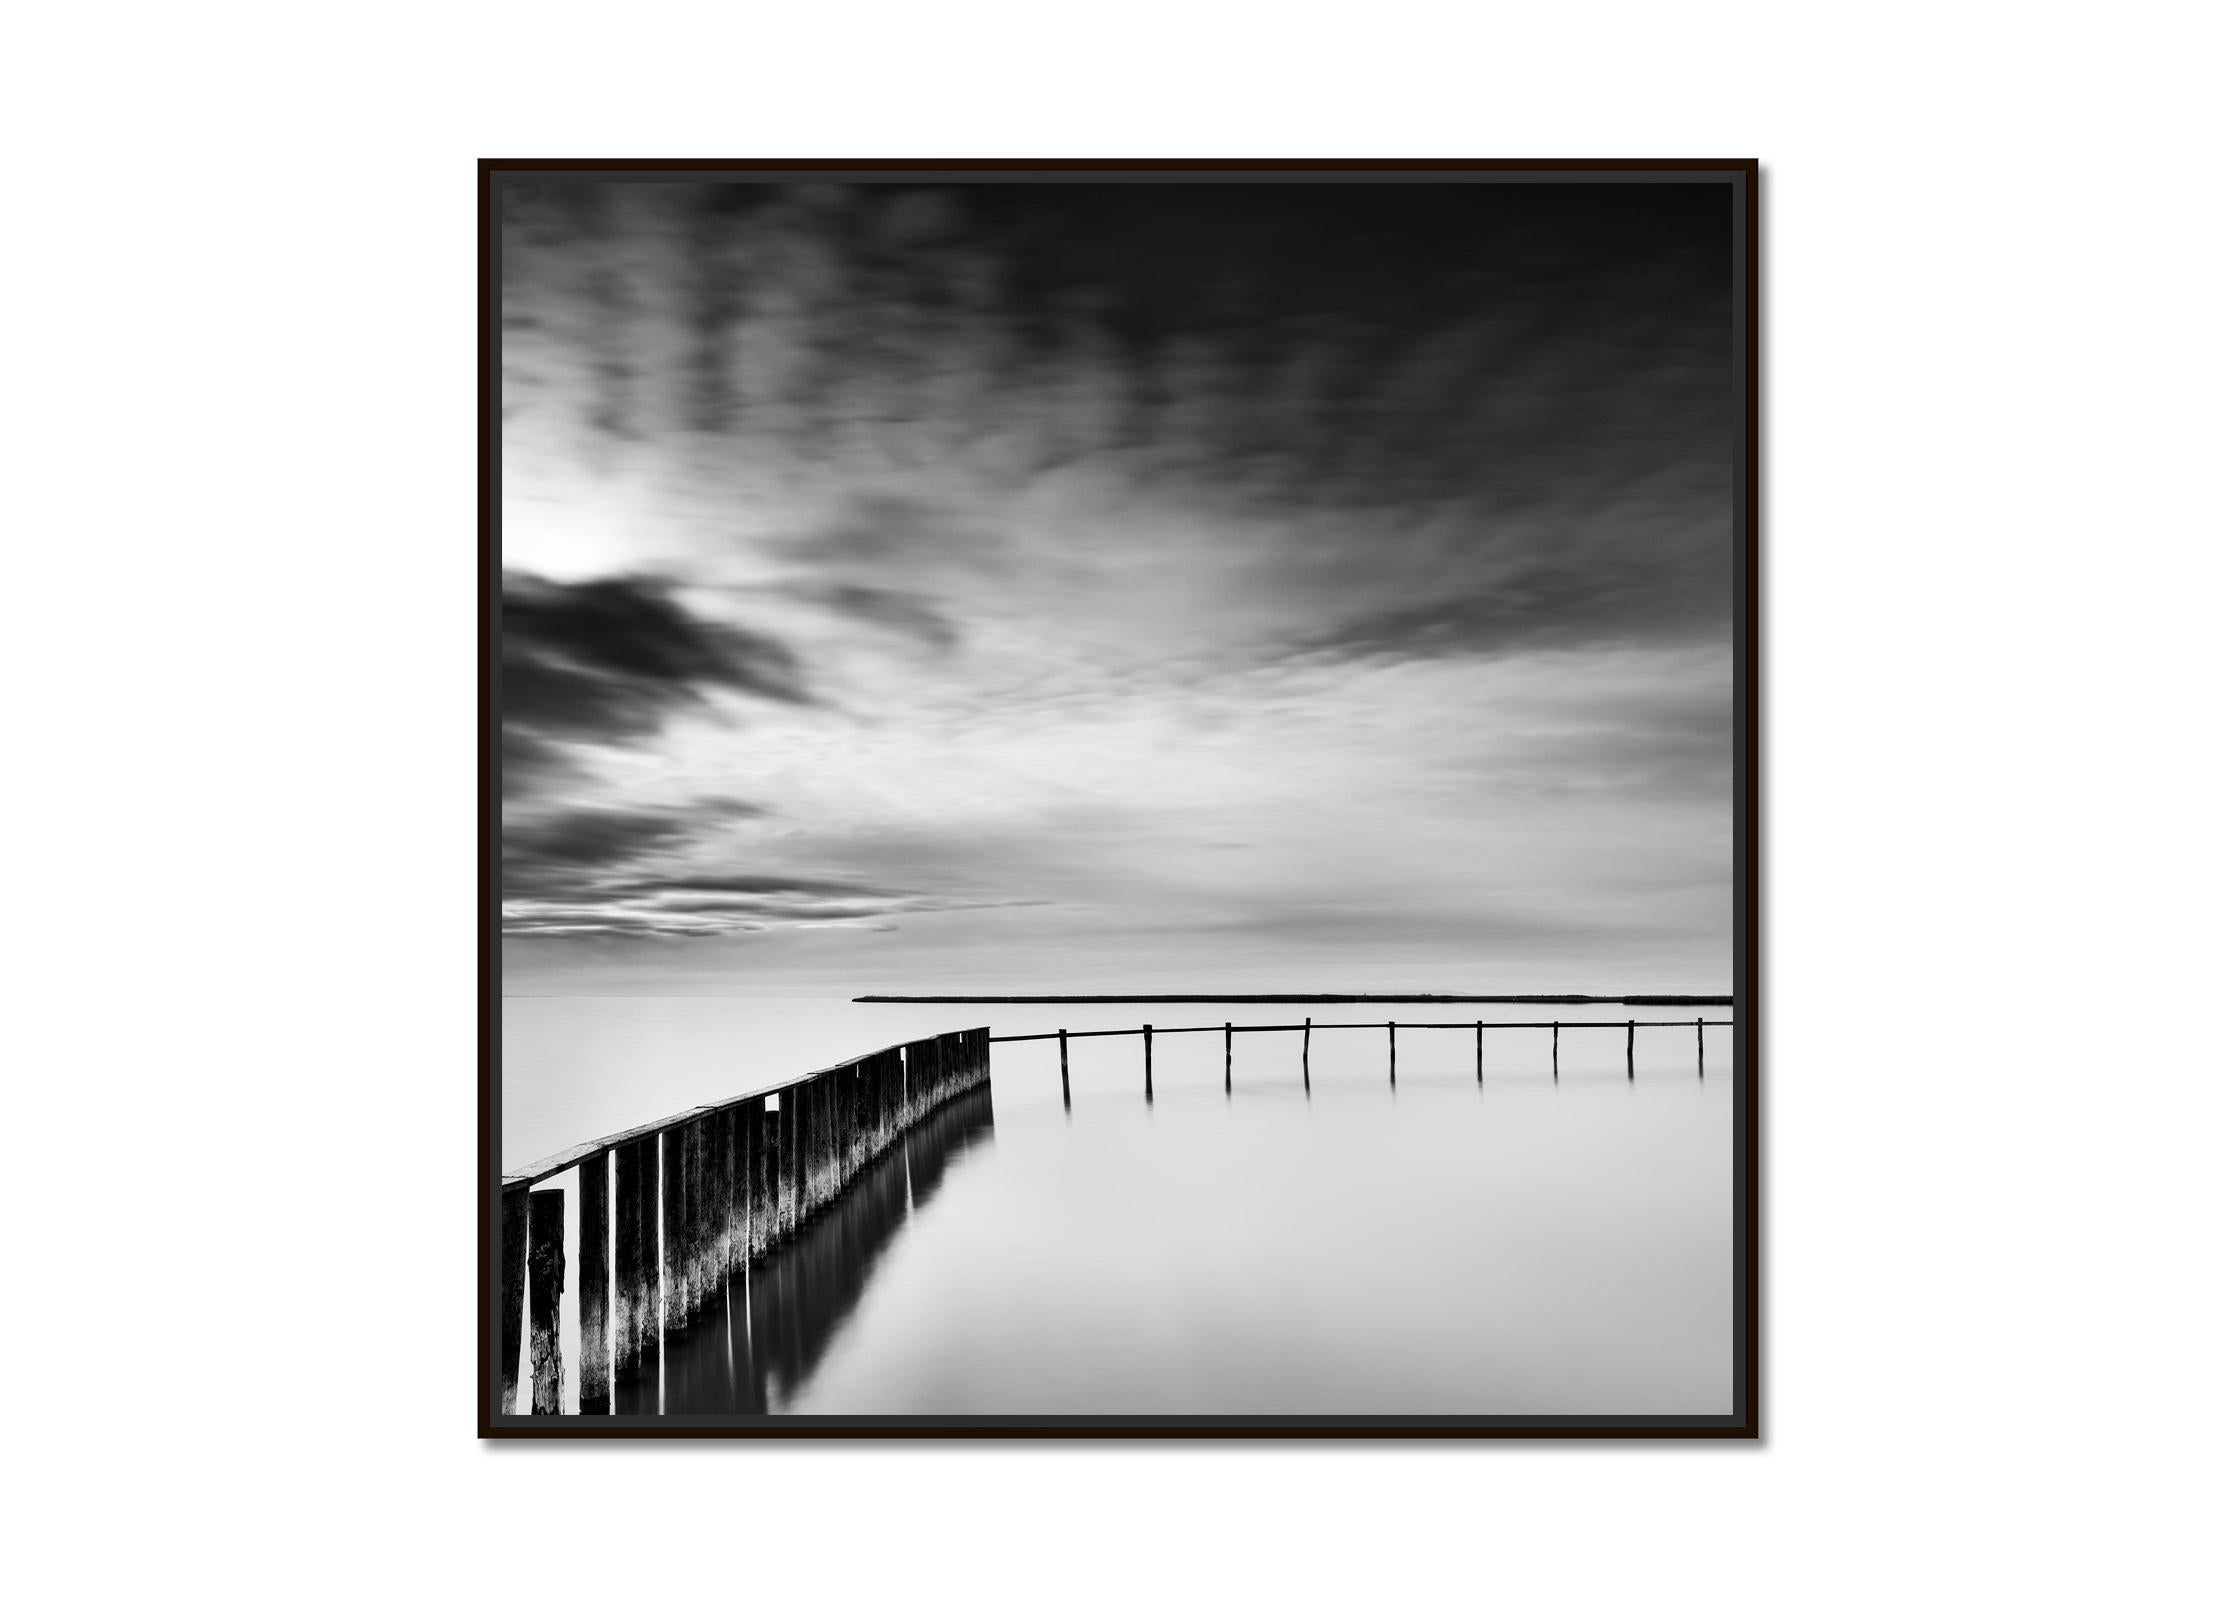 Swimming Area, cloudy, lake, black and white long exposure landscape photography - Photograph by Gerald Berghammer